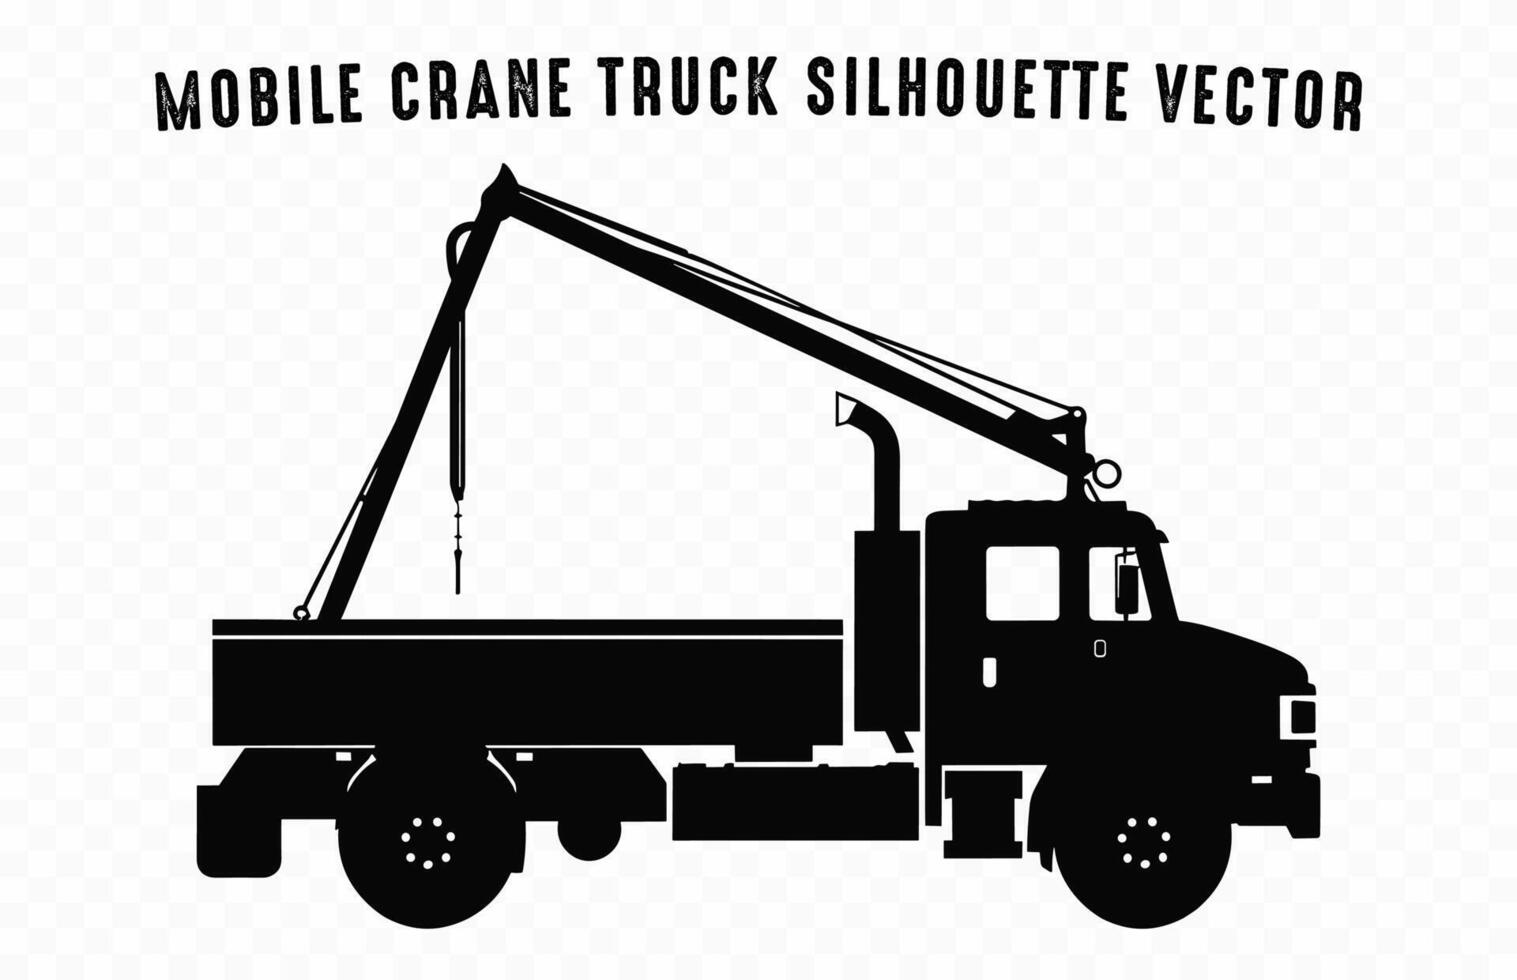 Mobile Crane Truck vector black Silhouette isolated on a white background